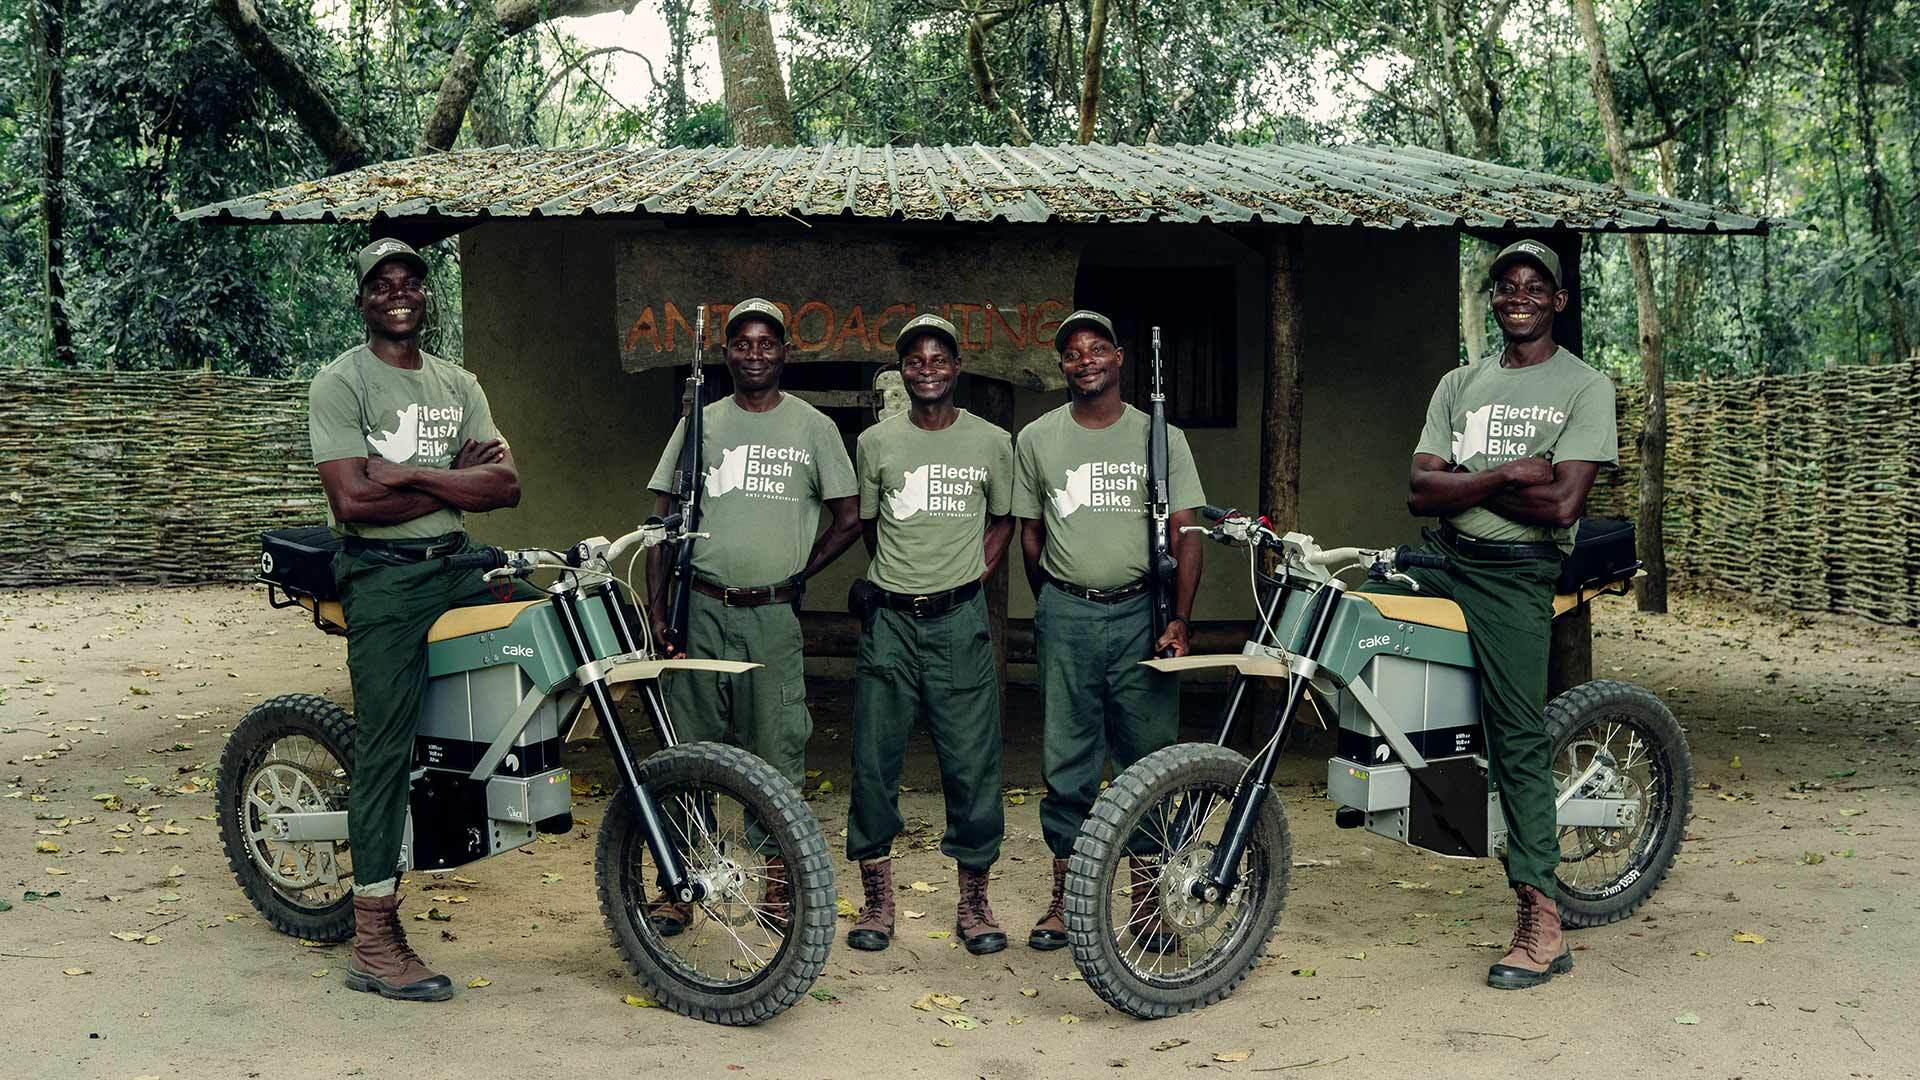 It is hoped that the anti-poaching initiative will help develop longer-lasting, more durable motorcycles for everyday uses